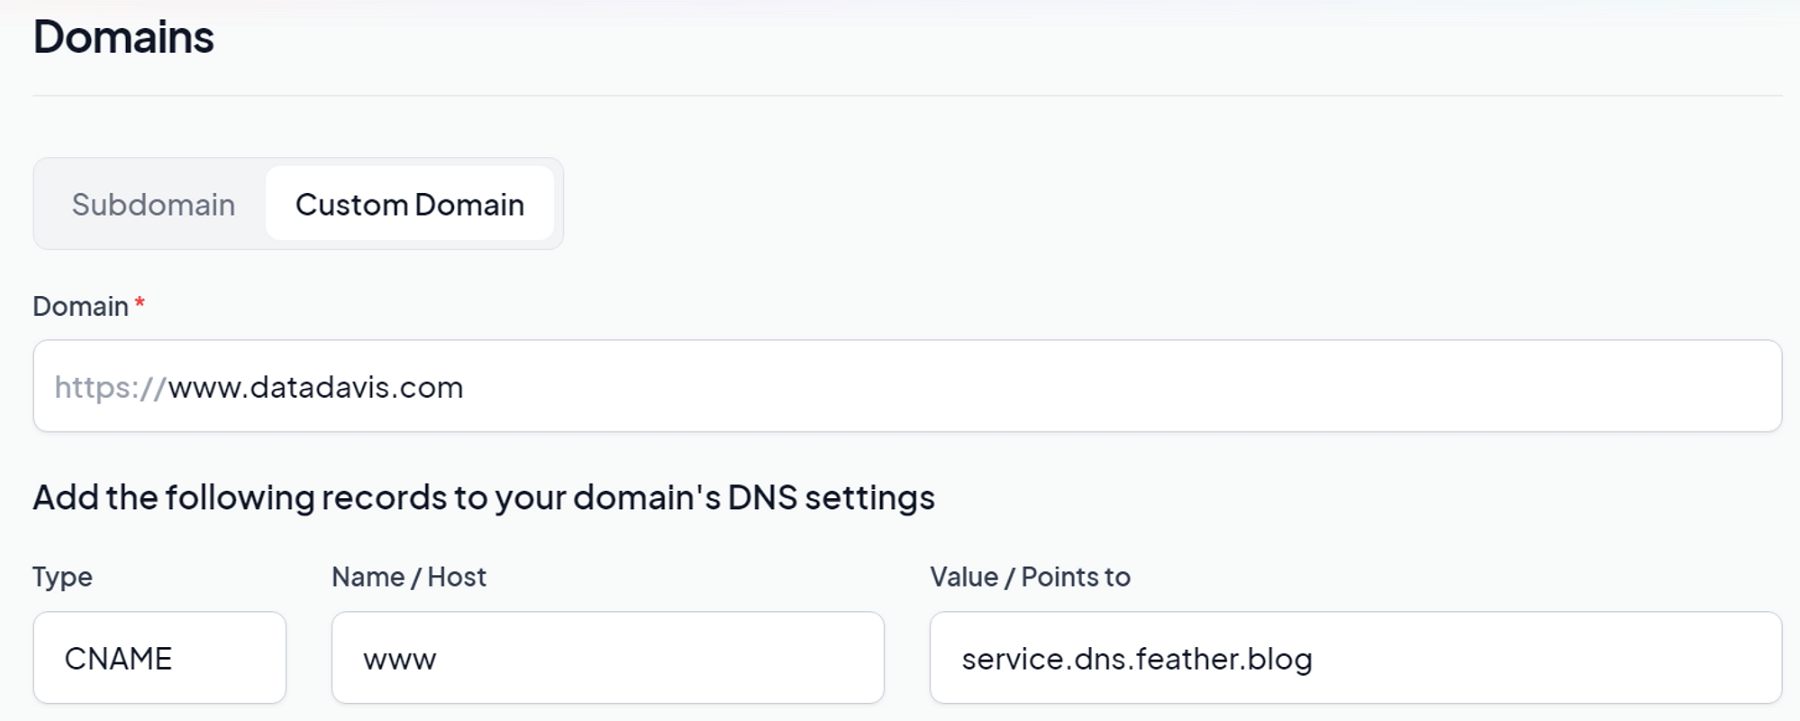 Domains settings inside Feather admin